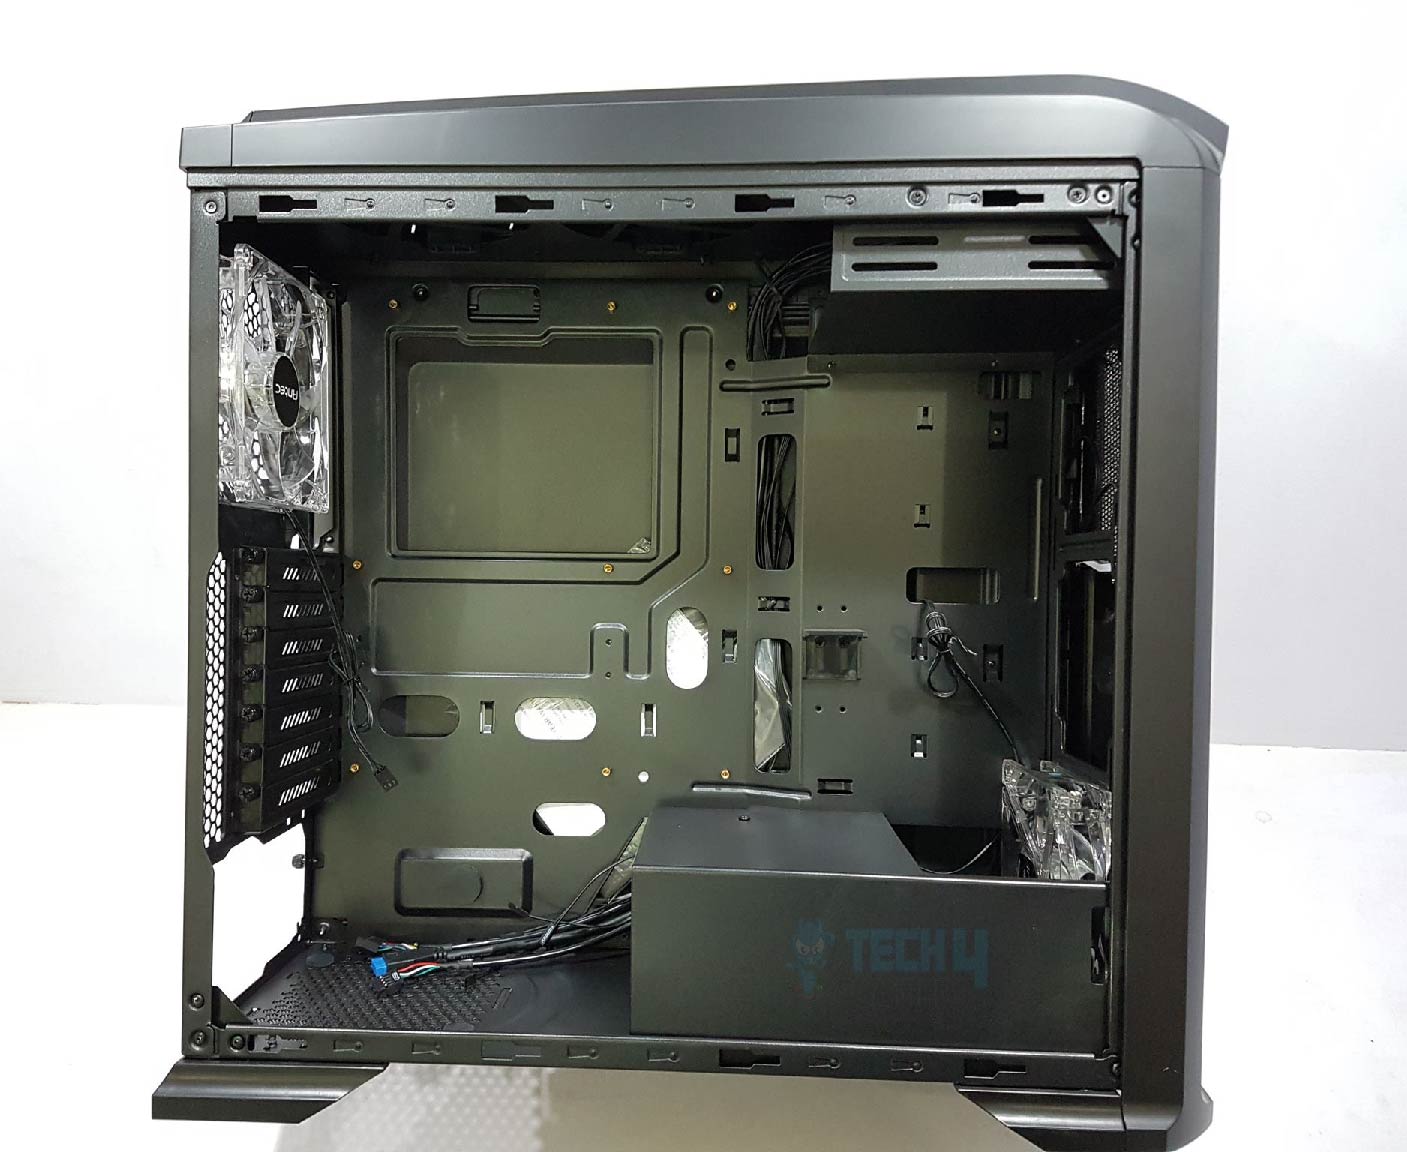 Antec GX330 Inside Of the Chassis Closer Look